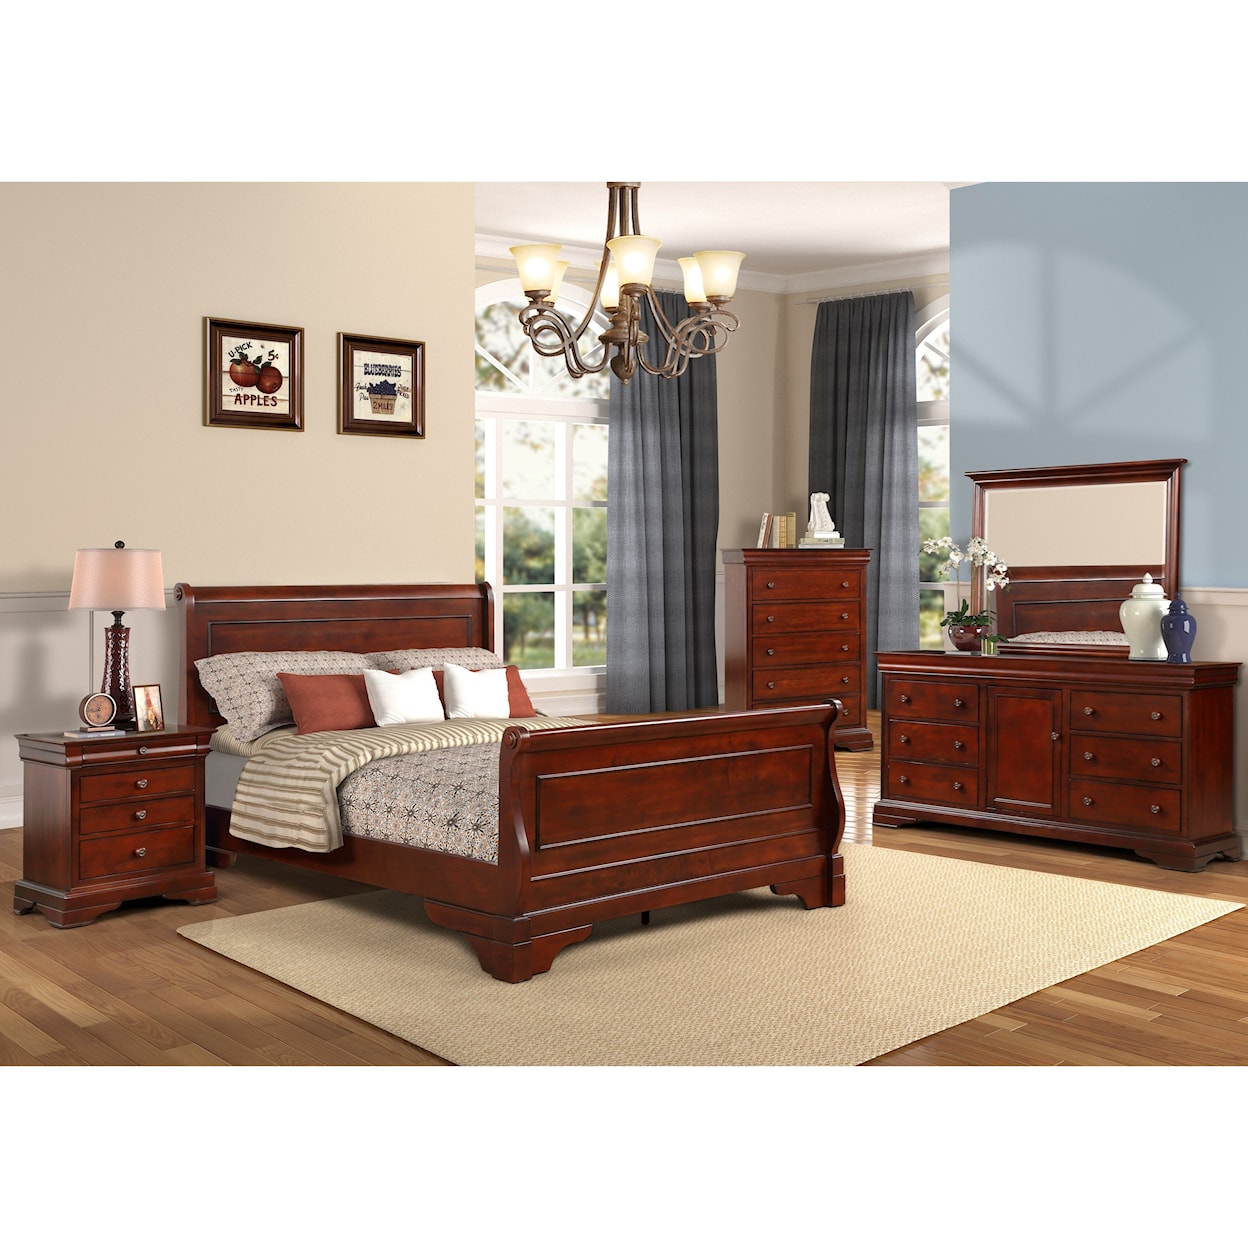 New Classic Furniture Versaille Twin Bedroom Group